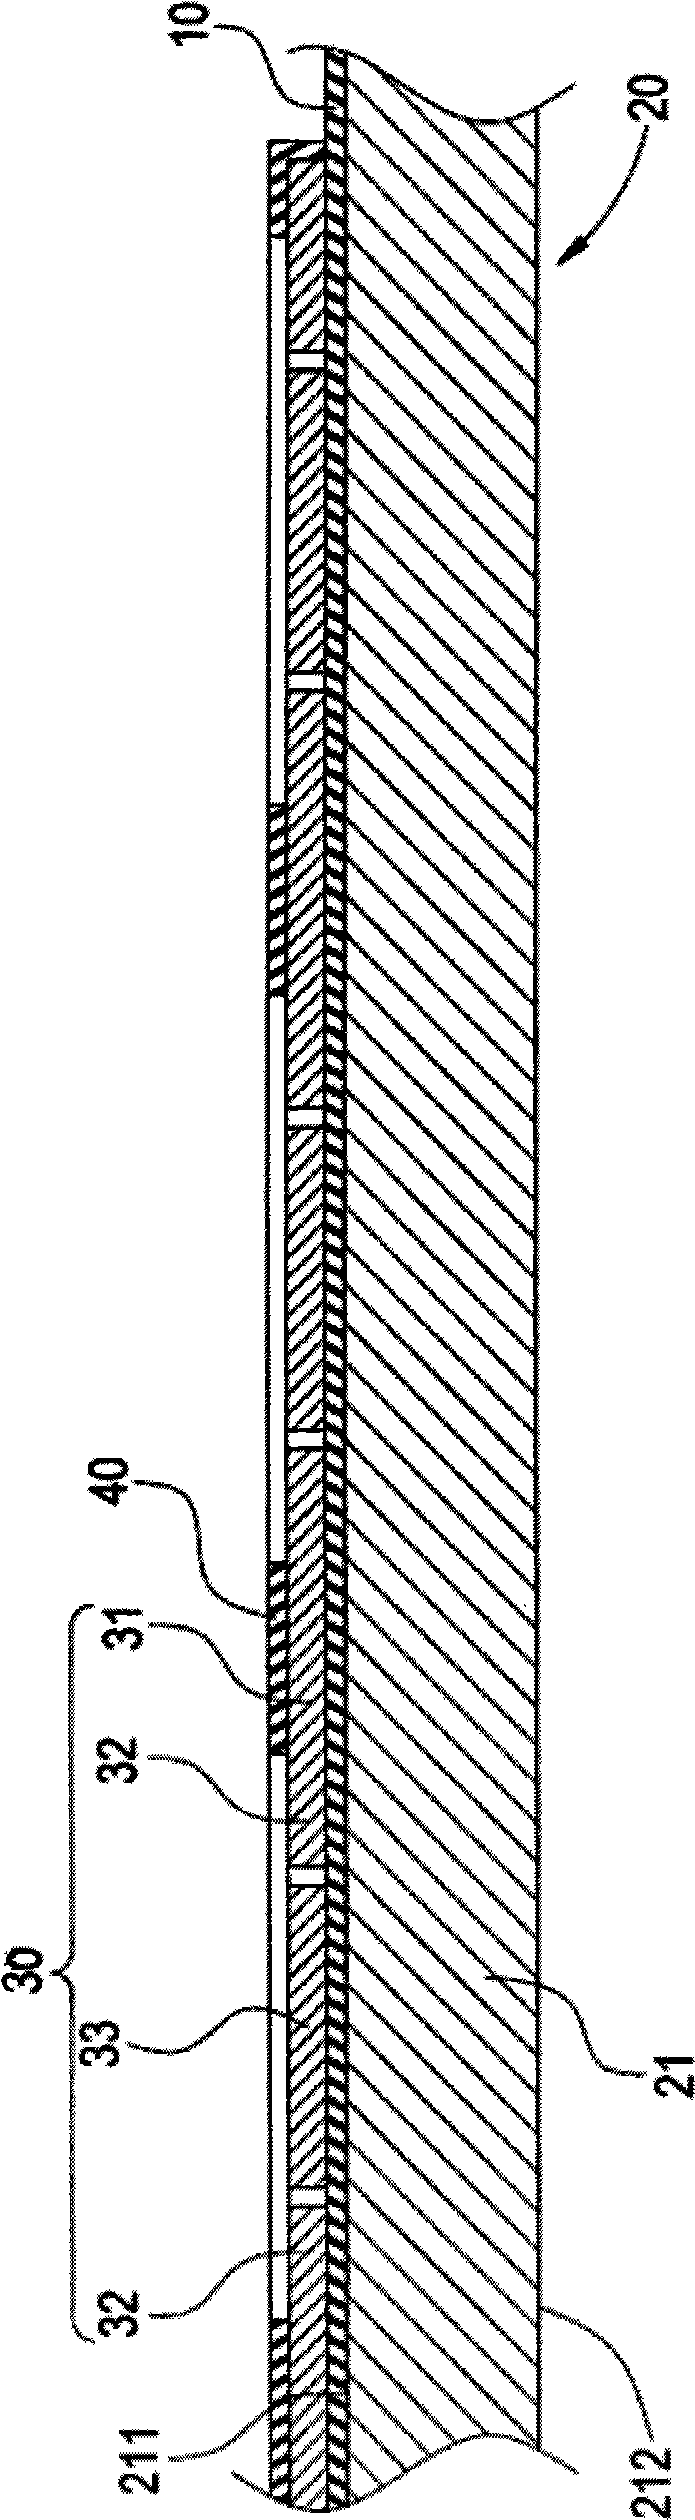 Combined structure and method of radiator and circuit